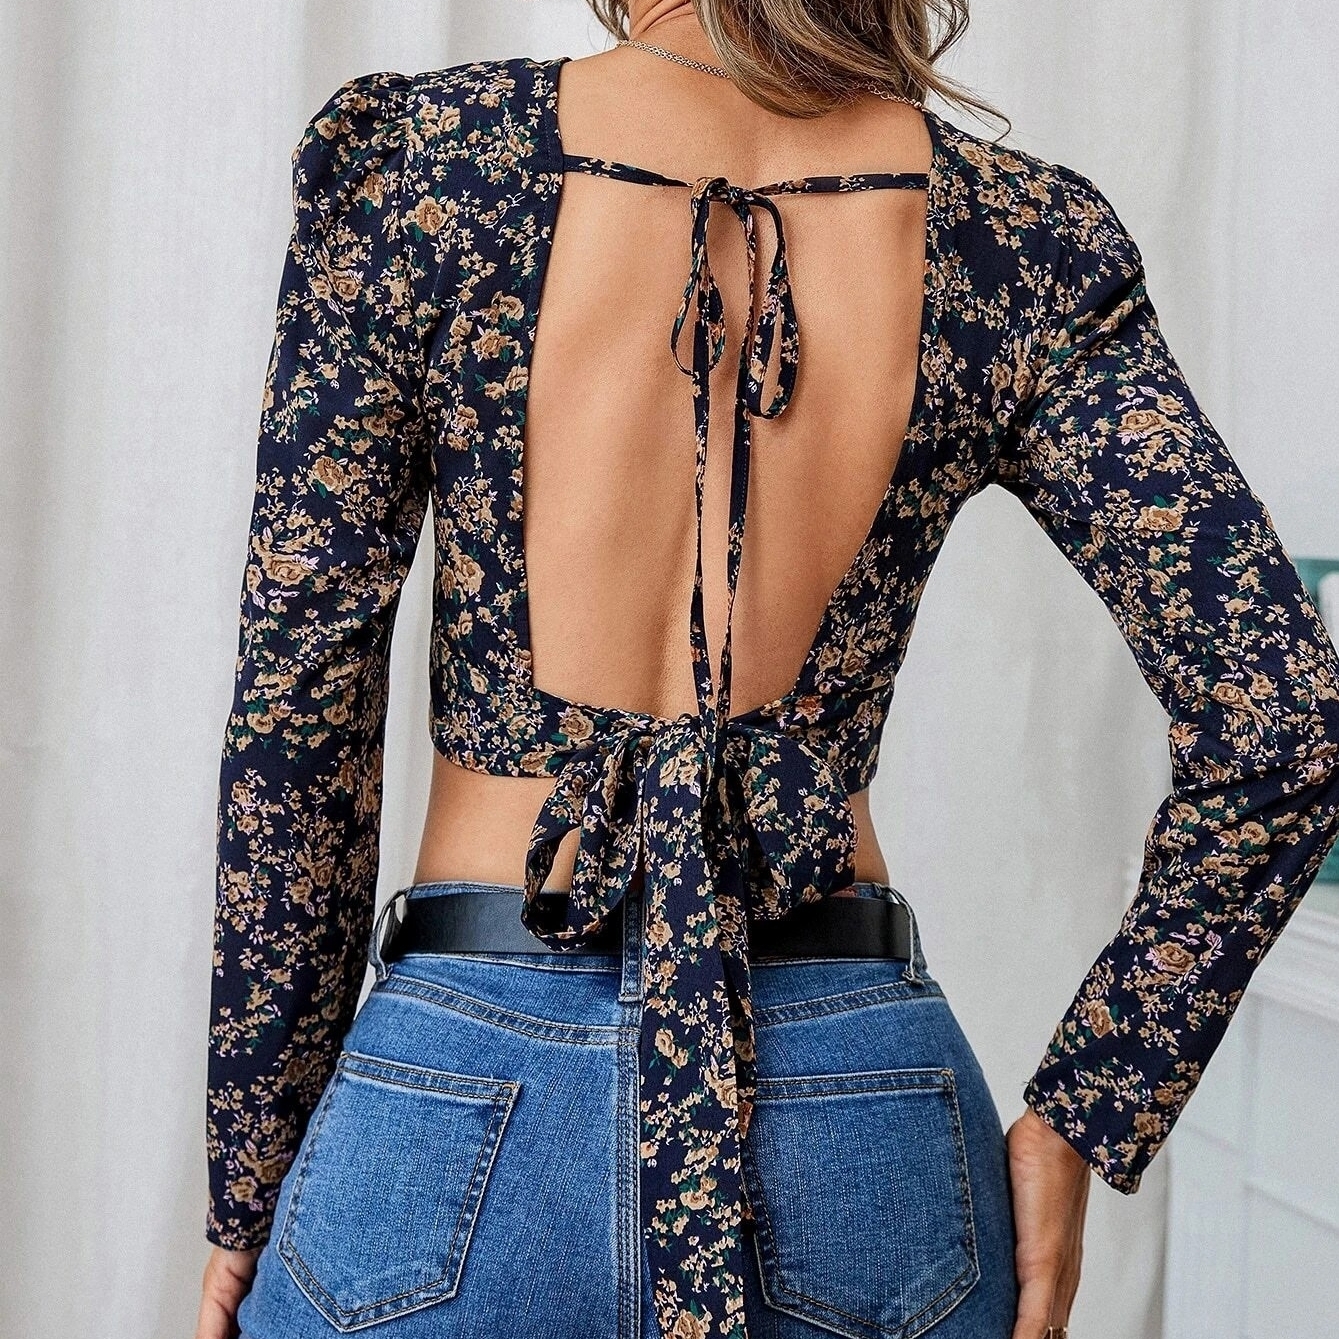 Allover Floral Print Puff Sleeve Tie Backless Crop Blouse - L